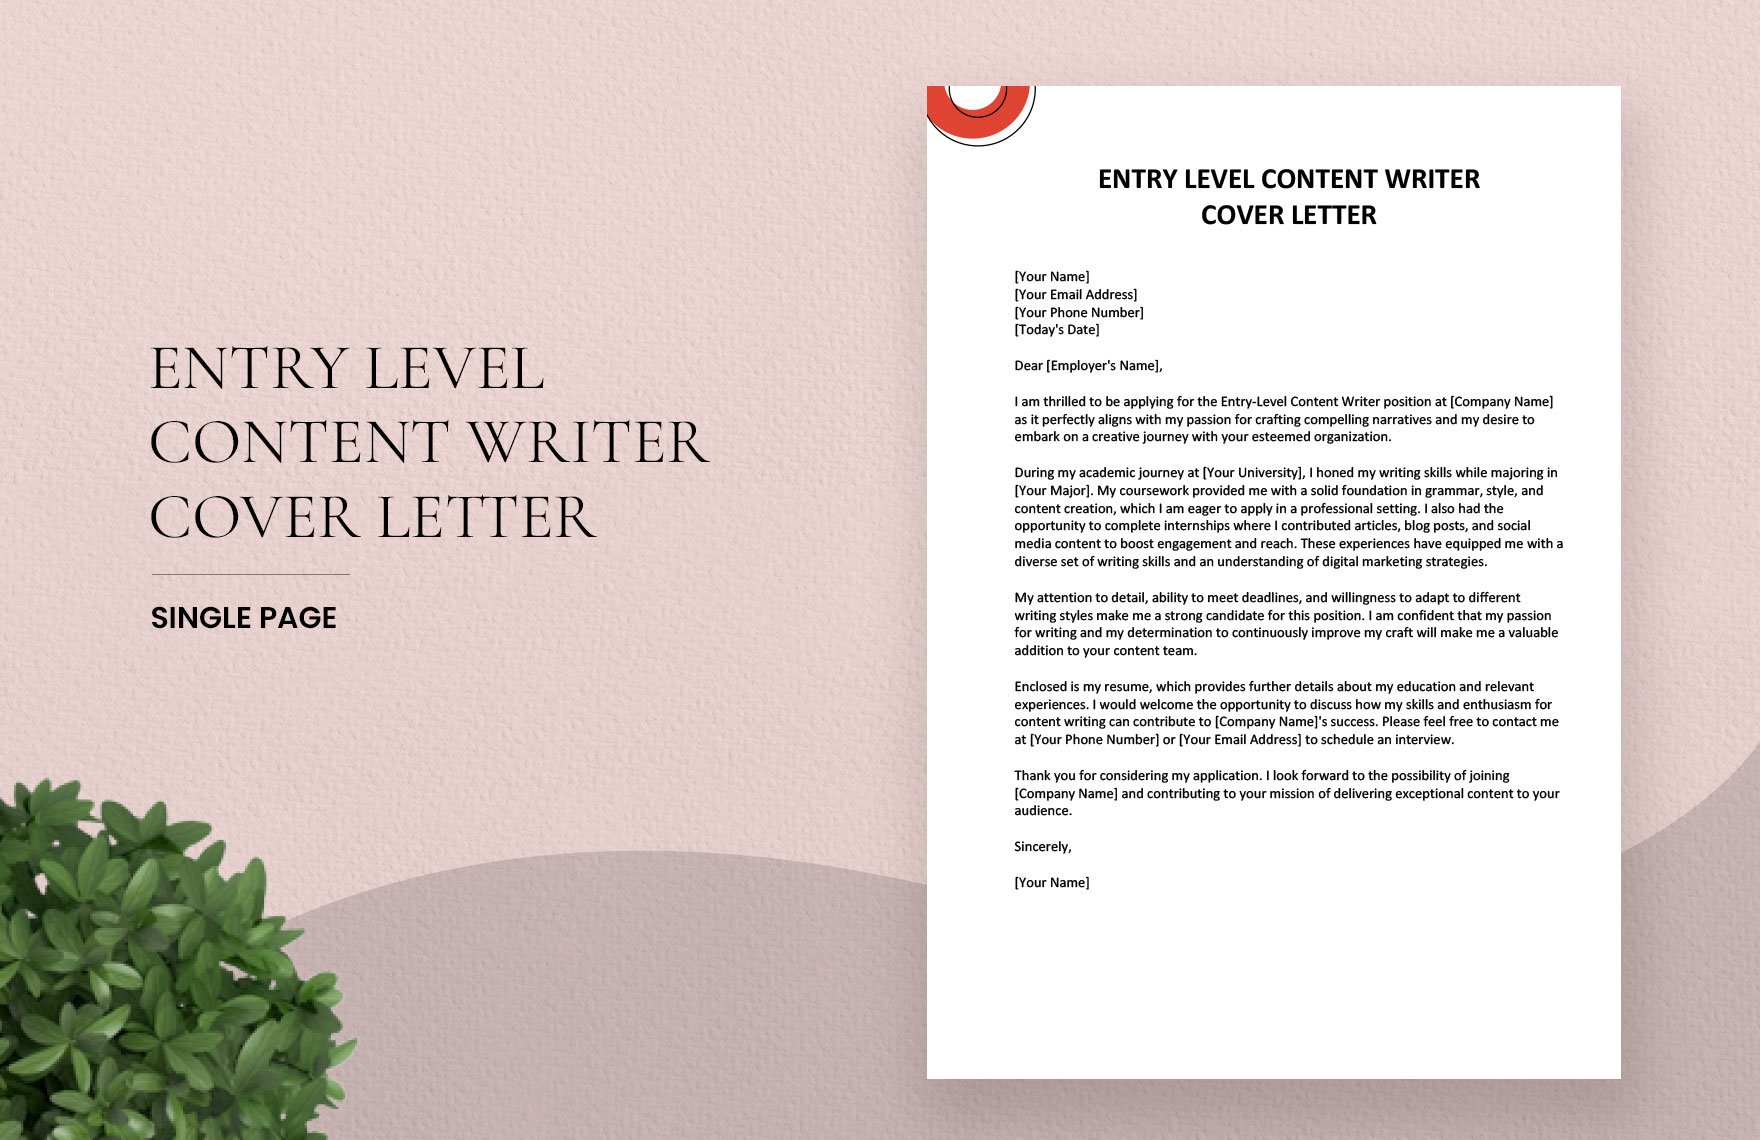 Entry Level Content Writer Cover Letter